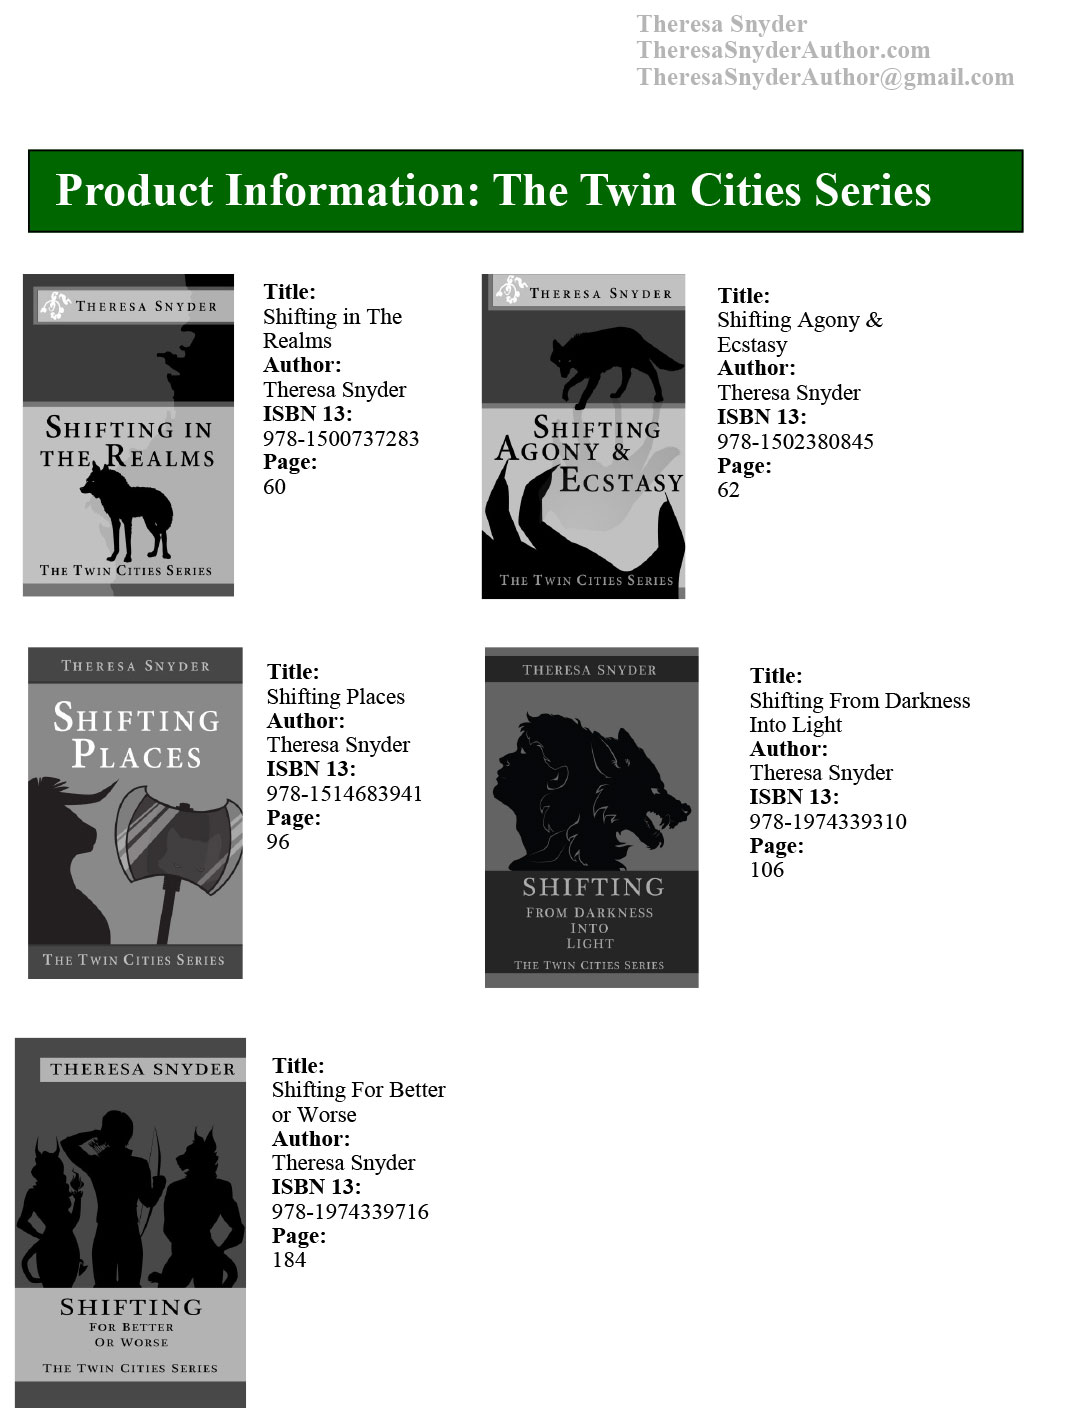 Product info: The Twin Cities Series